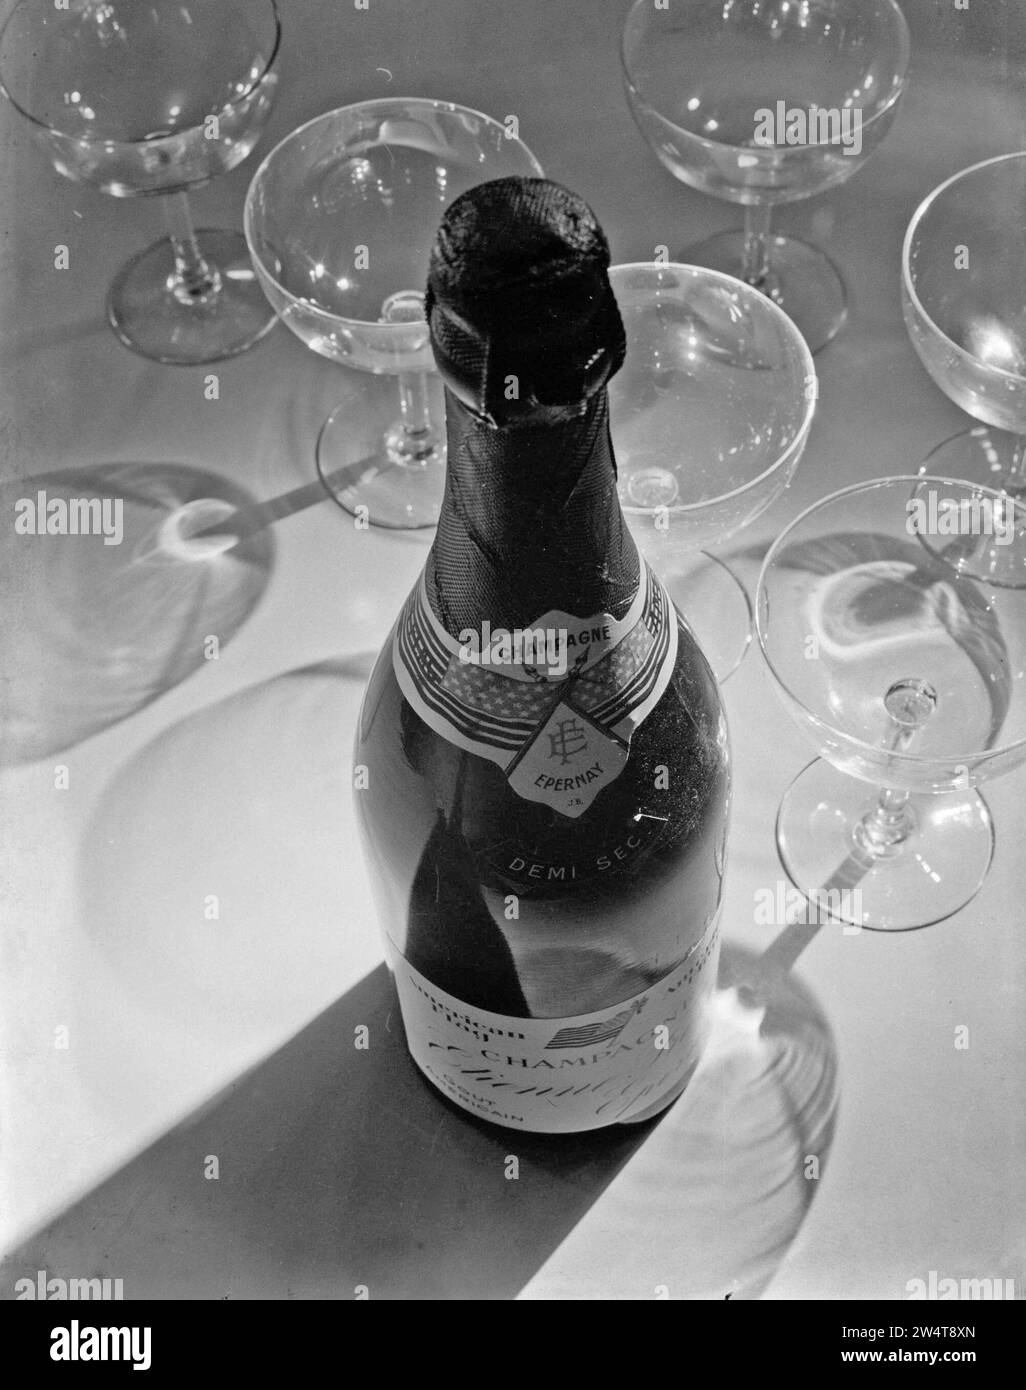 1930s champagne bottle Black and White Stock Photos & Images - Alamy